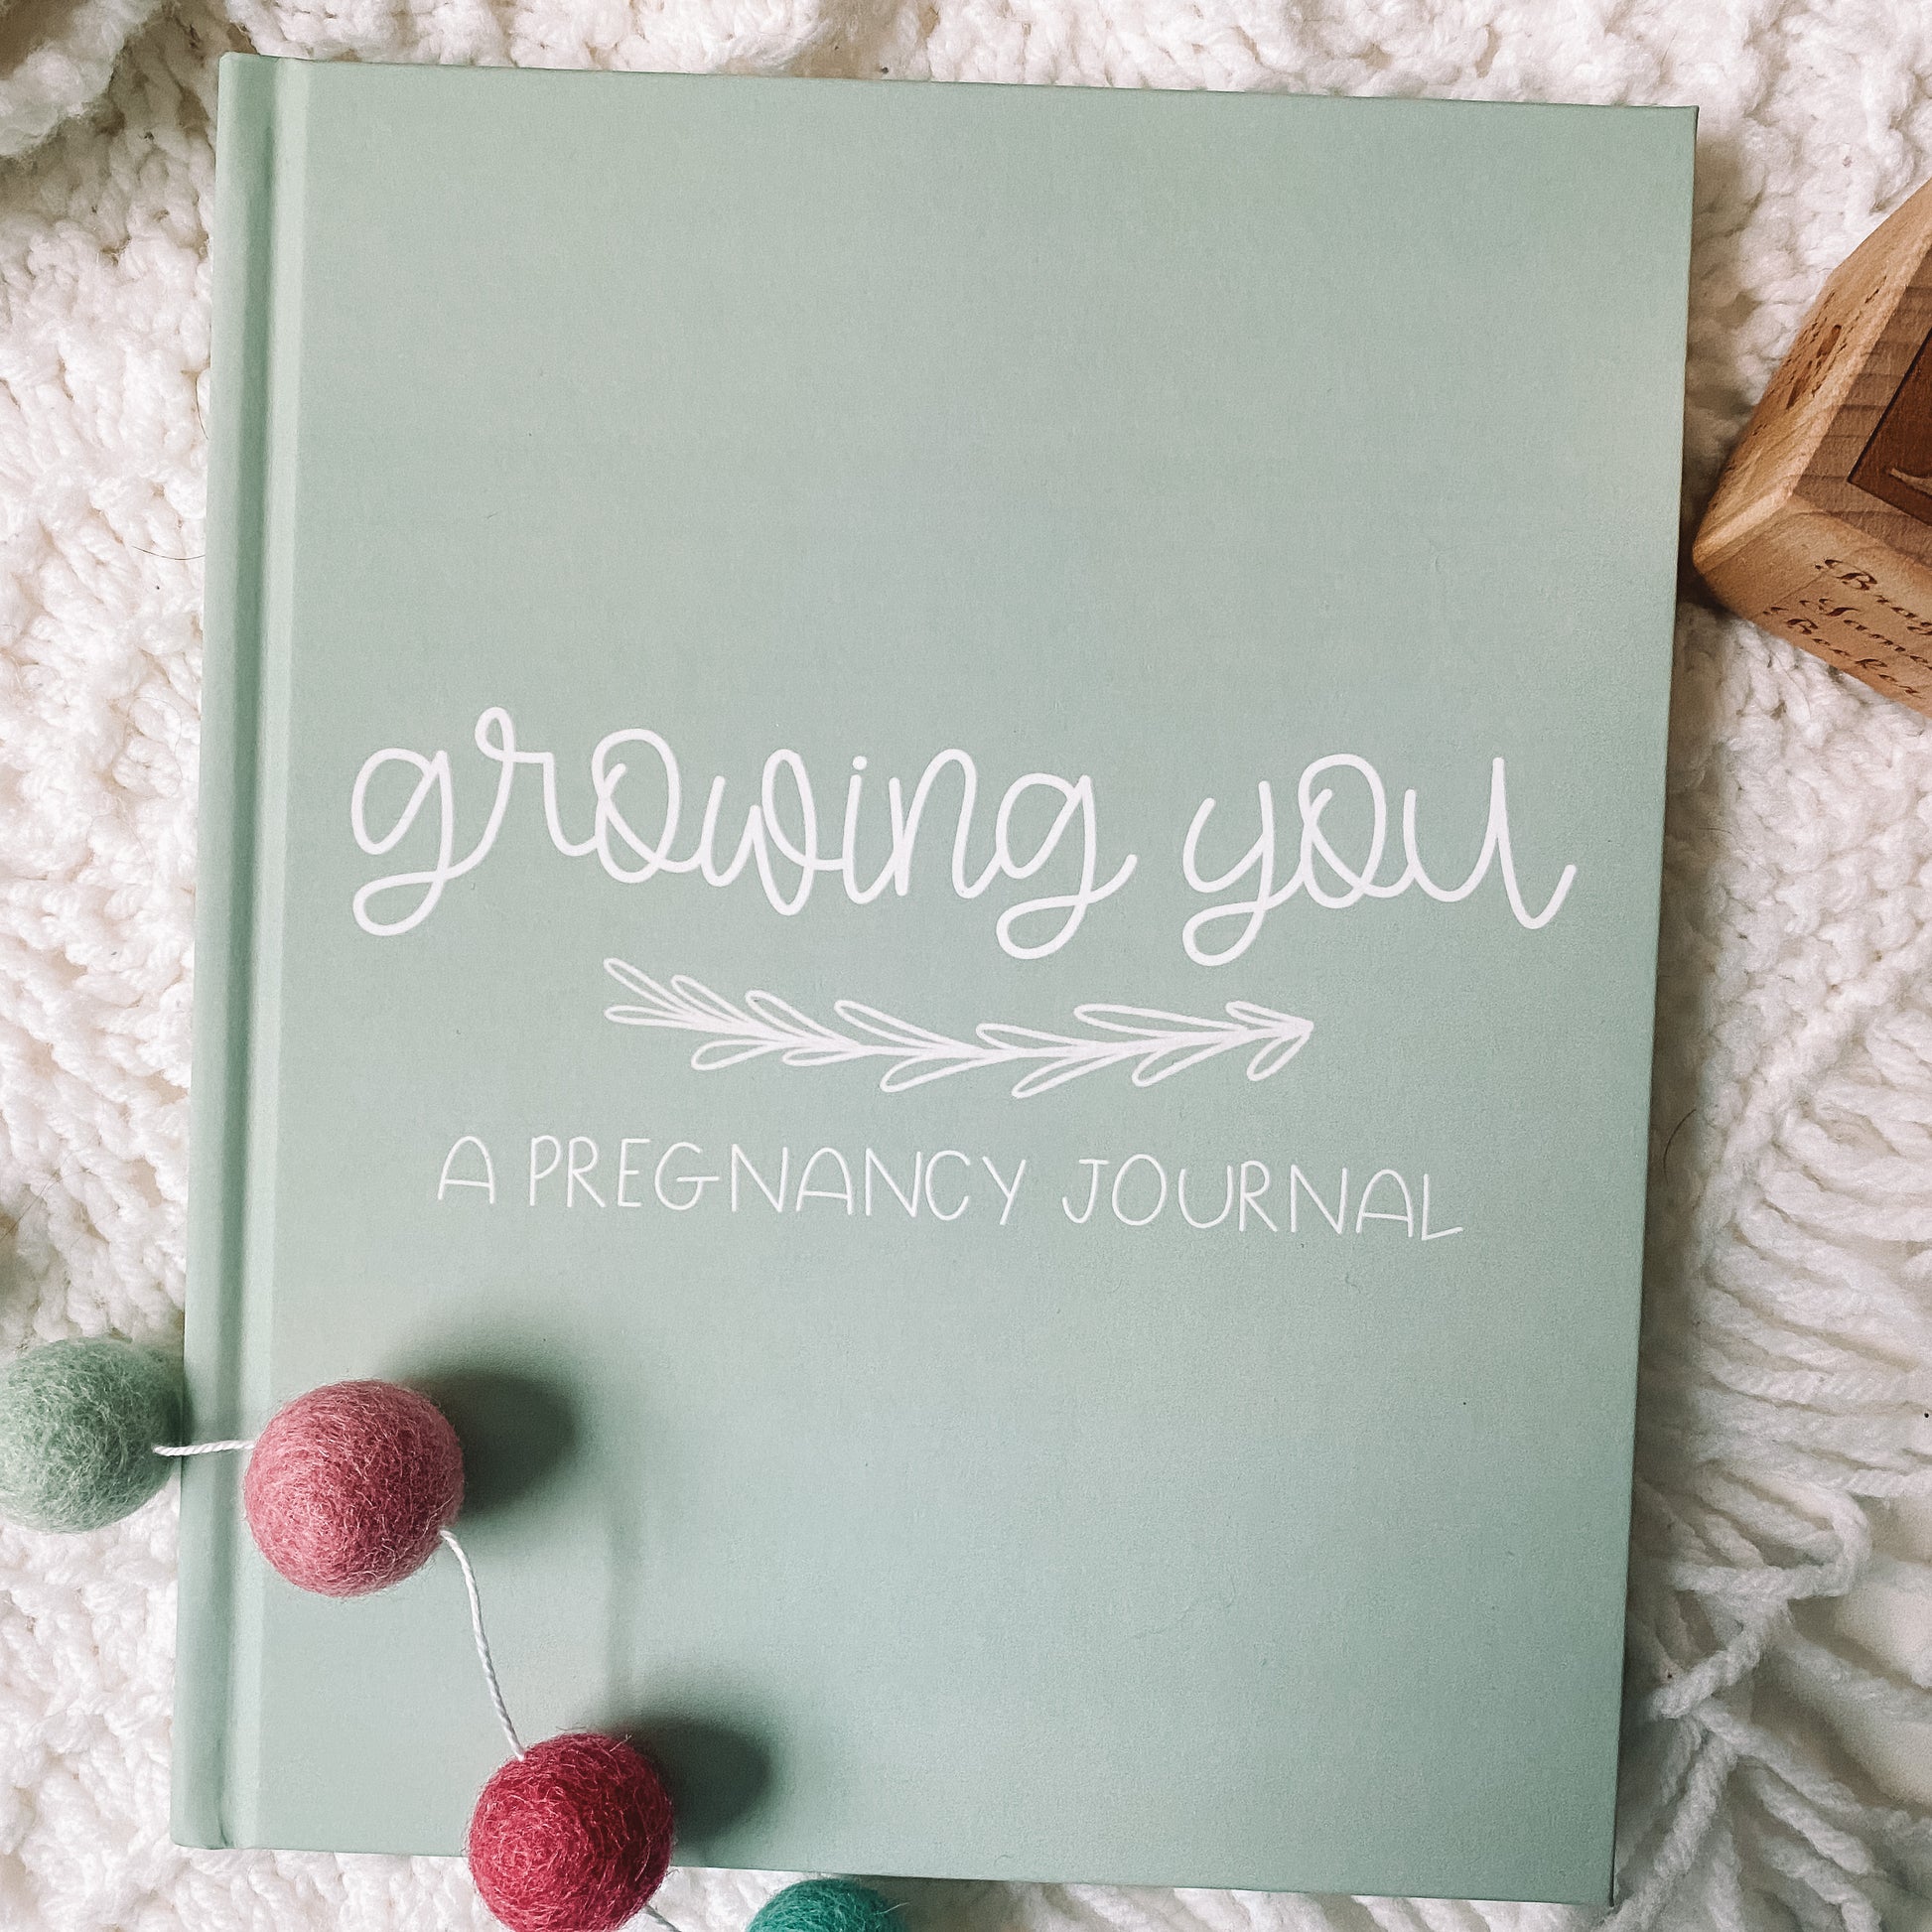 Green hardcover book with white text titled Growing You A Pregnancy Journal